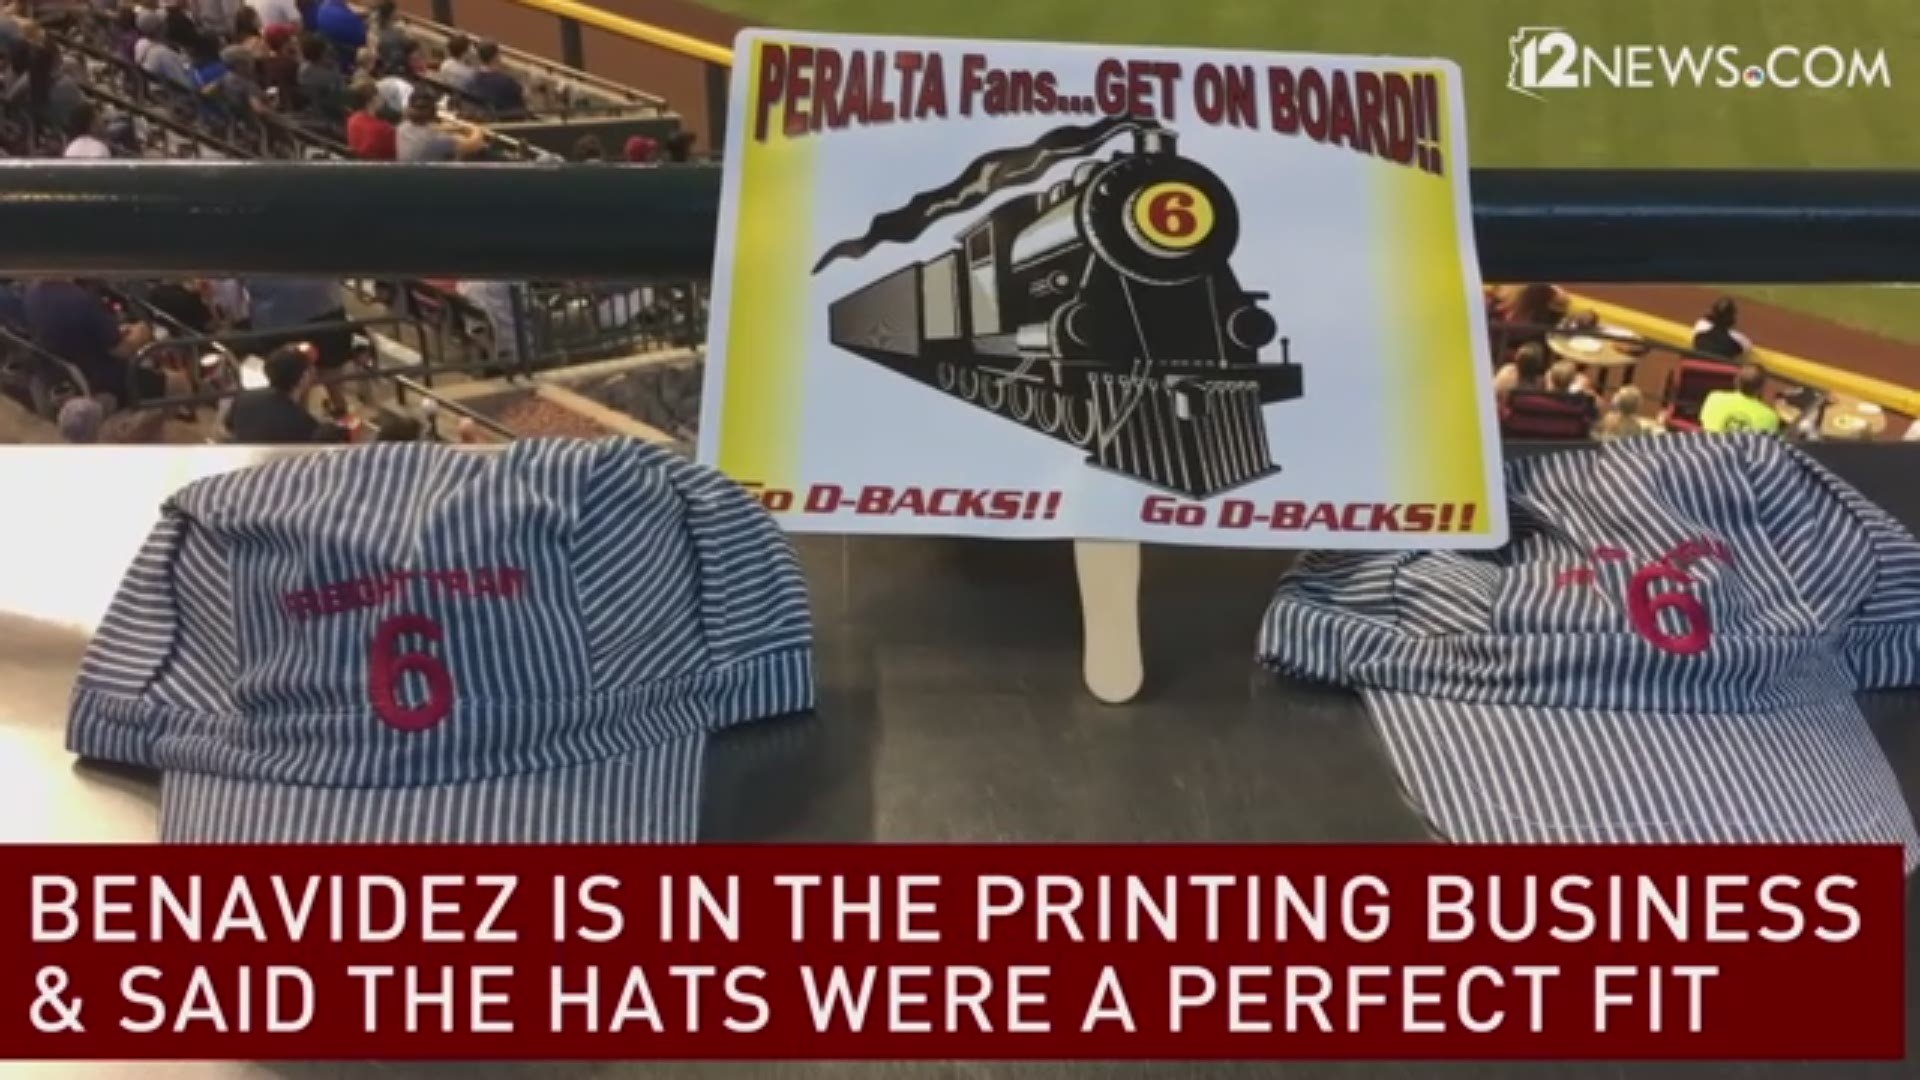 Julian Benavidez and Pamela Qandil found a unique way to show their support for Arizona Diamondbacks outfielder David Peralta, and it's safe to say we're all on board.